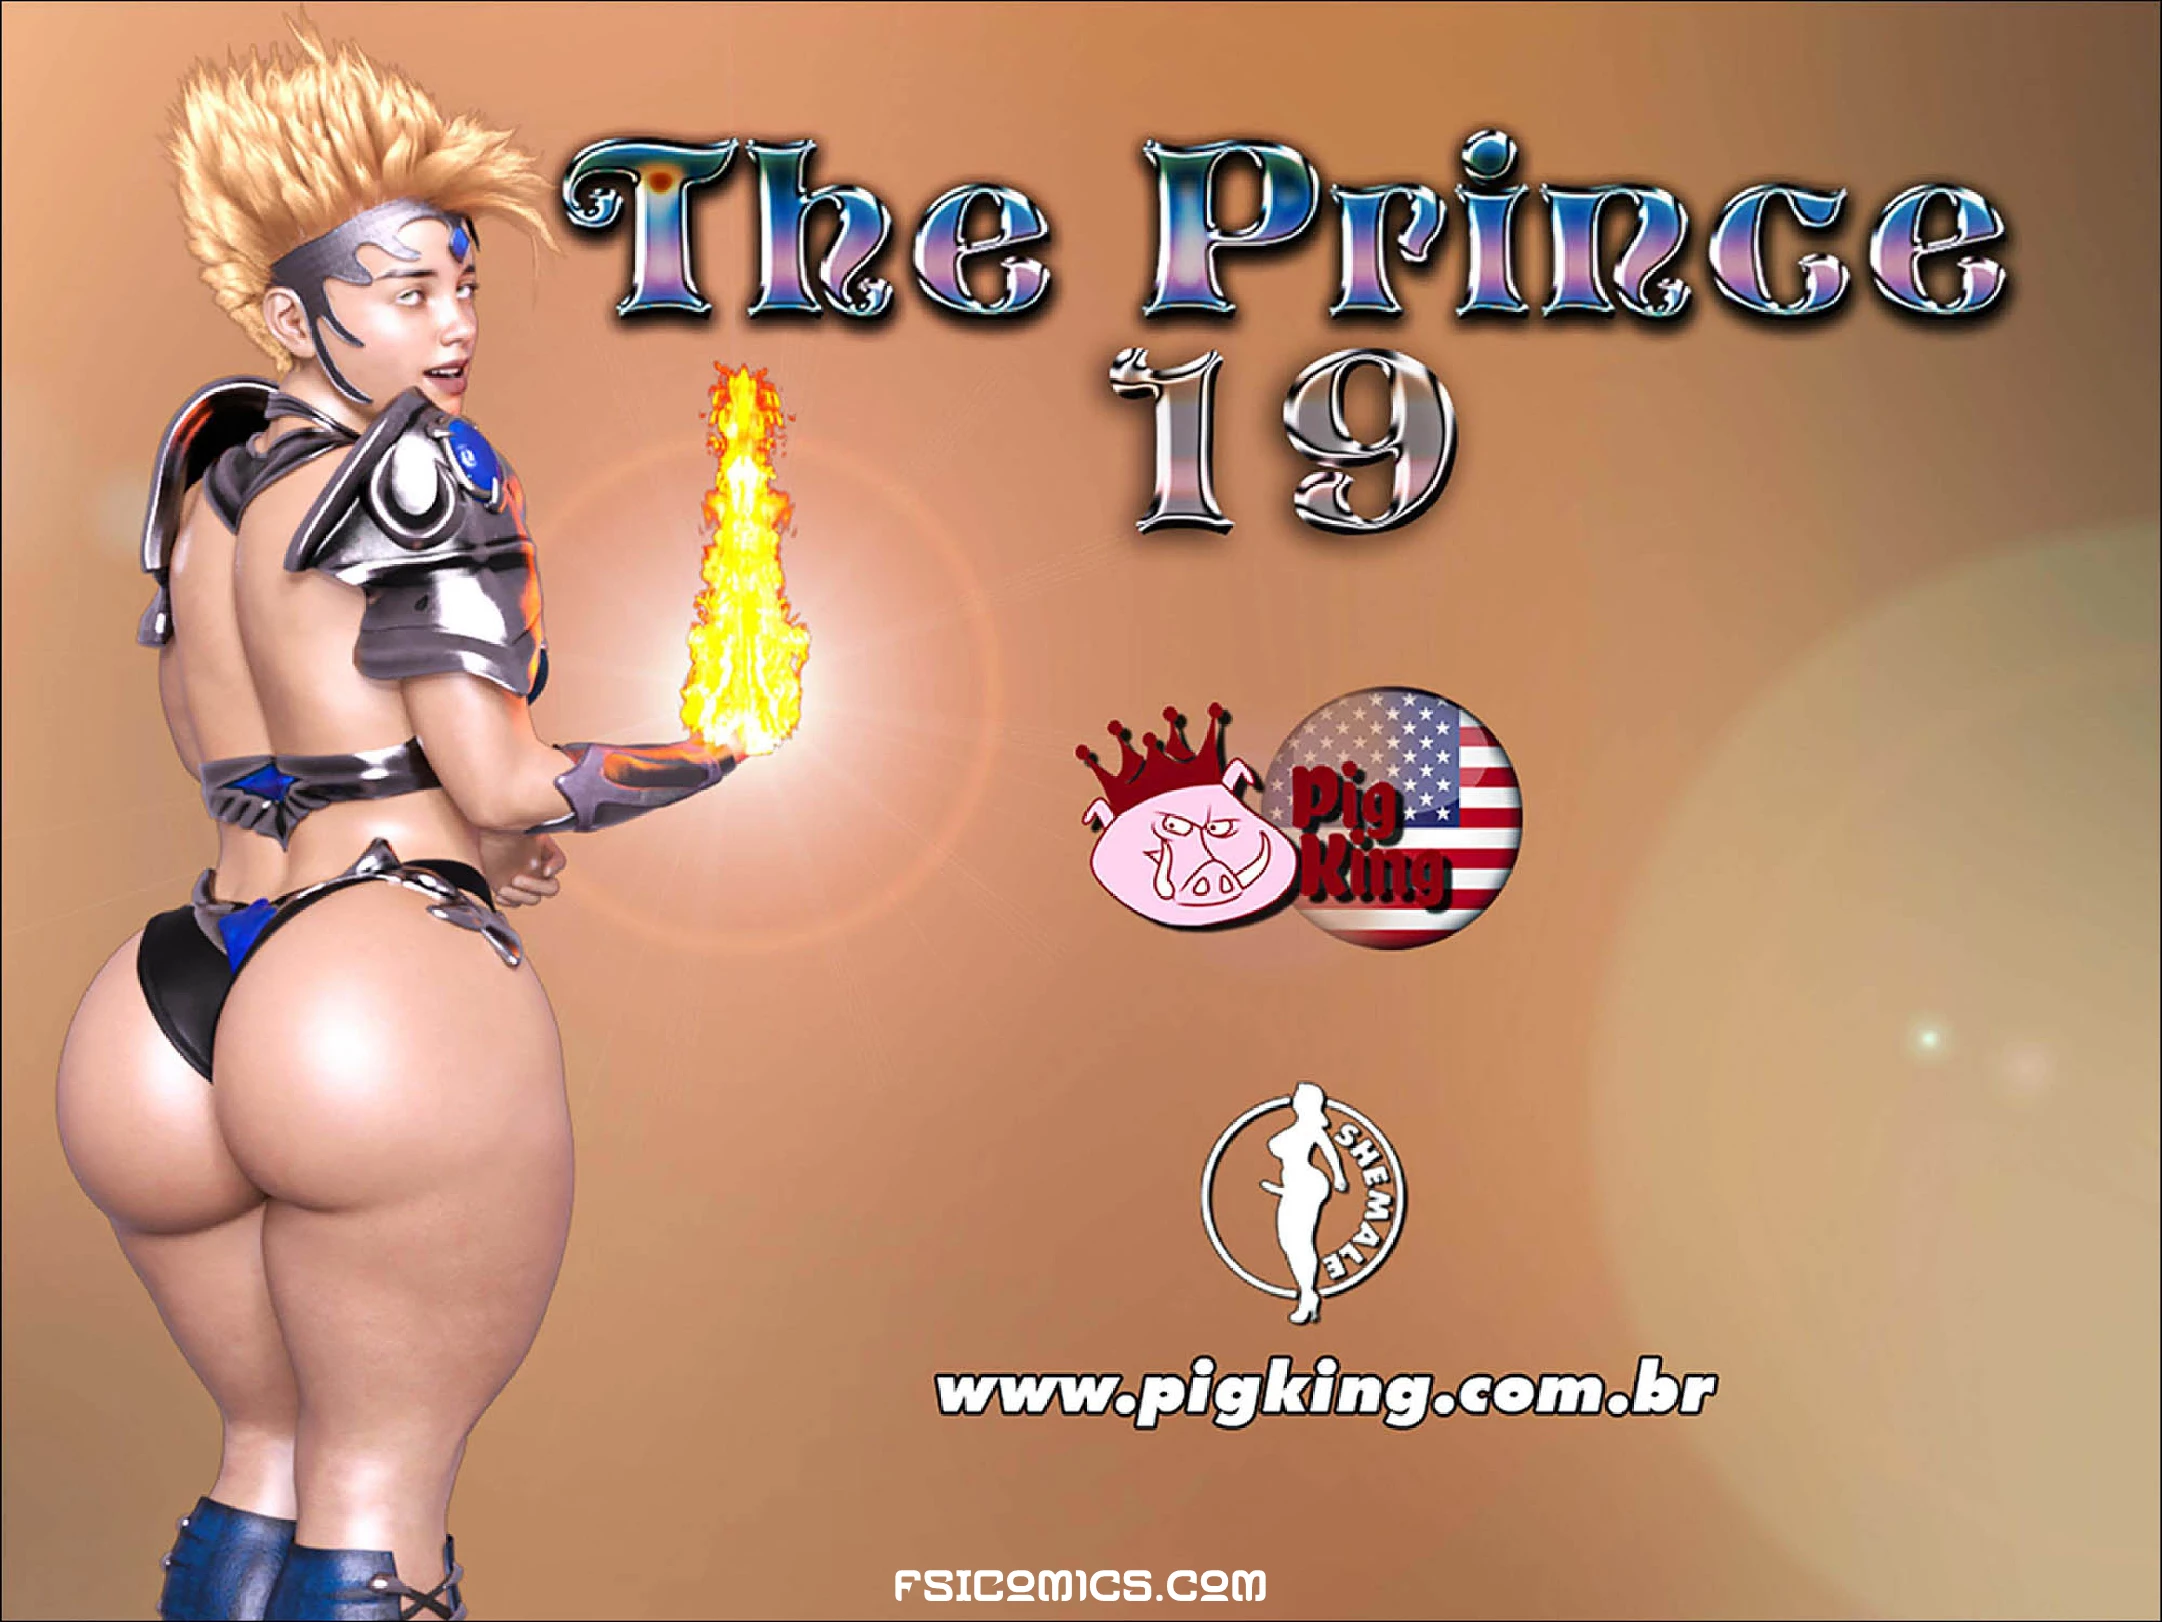 The Prince Chapter 19 – PigKing - 237 - FSIComics